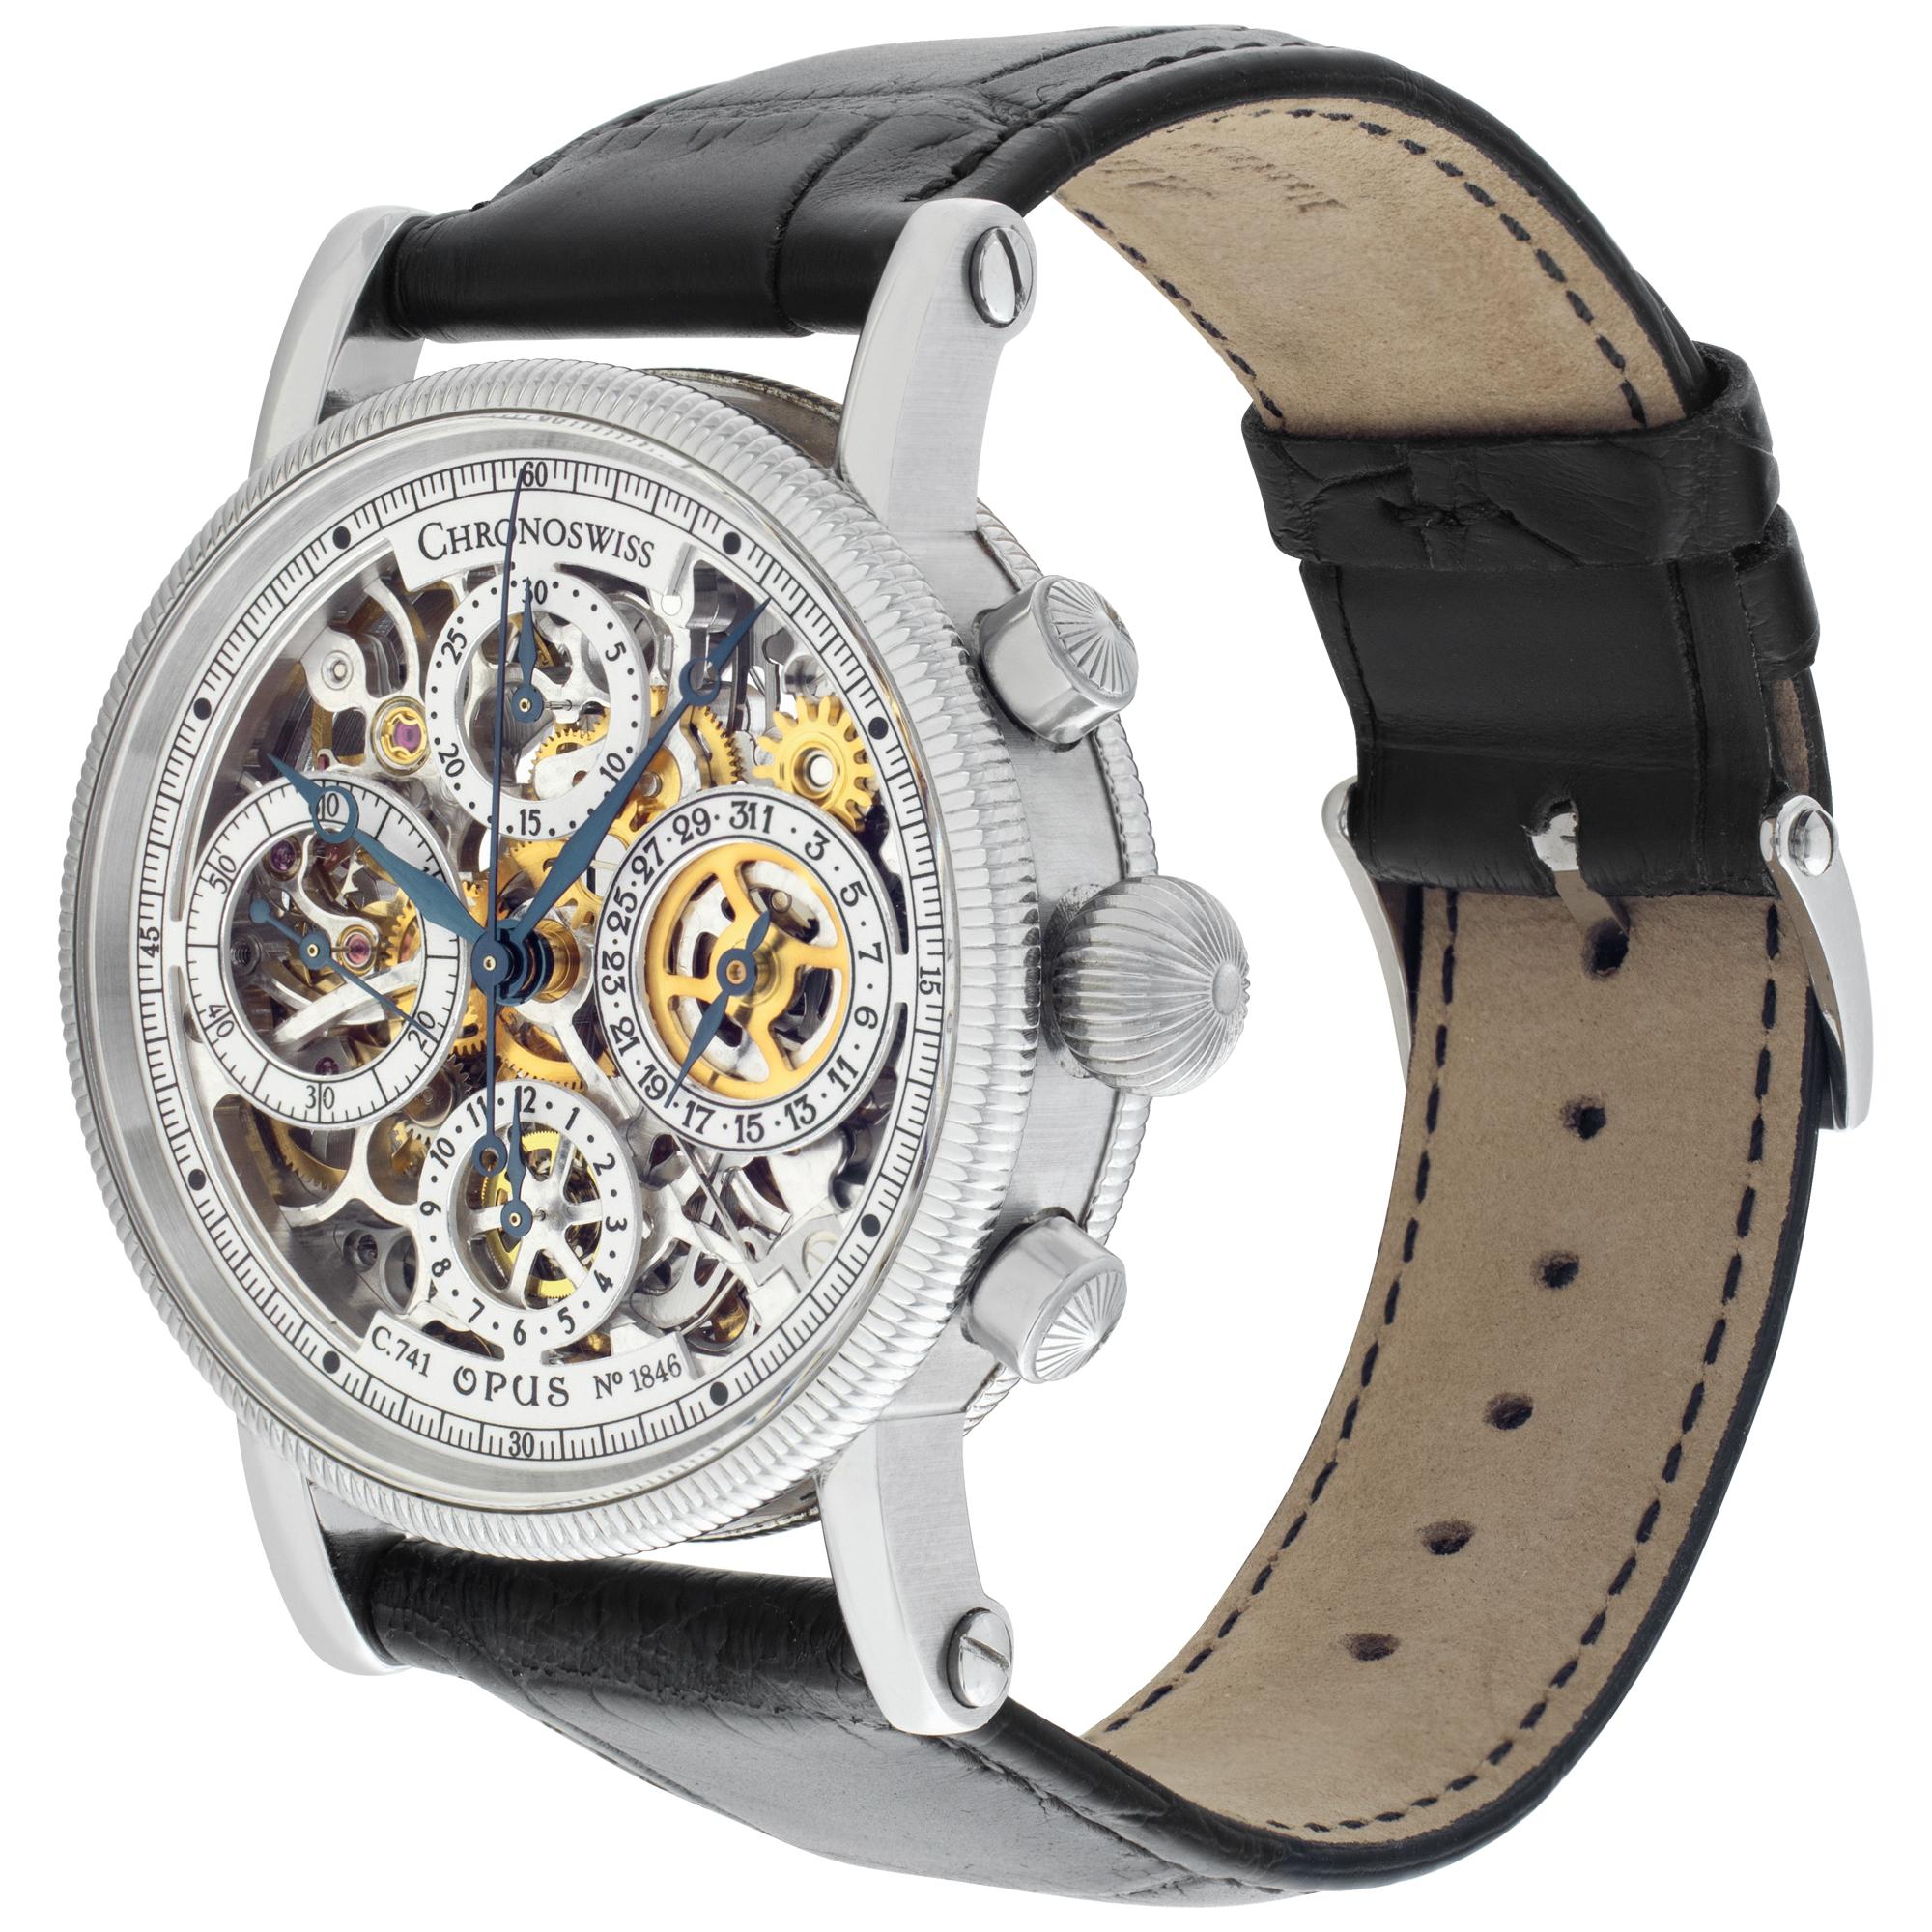 Chronoswiss Opus in stainless steel with skeletonized dial on leather strap with stainless steel Chronoswiss tang buckle. Auto w/ subseconds, date and chronograph. 38 mm case size. Fine Pre-owned Chronoswiss Watch. Certified preowned Classic